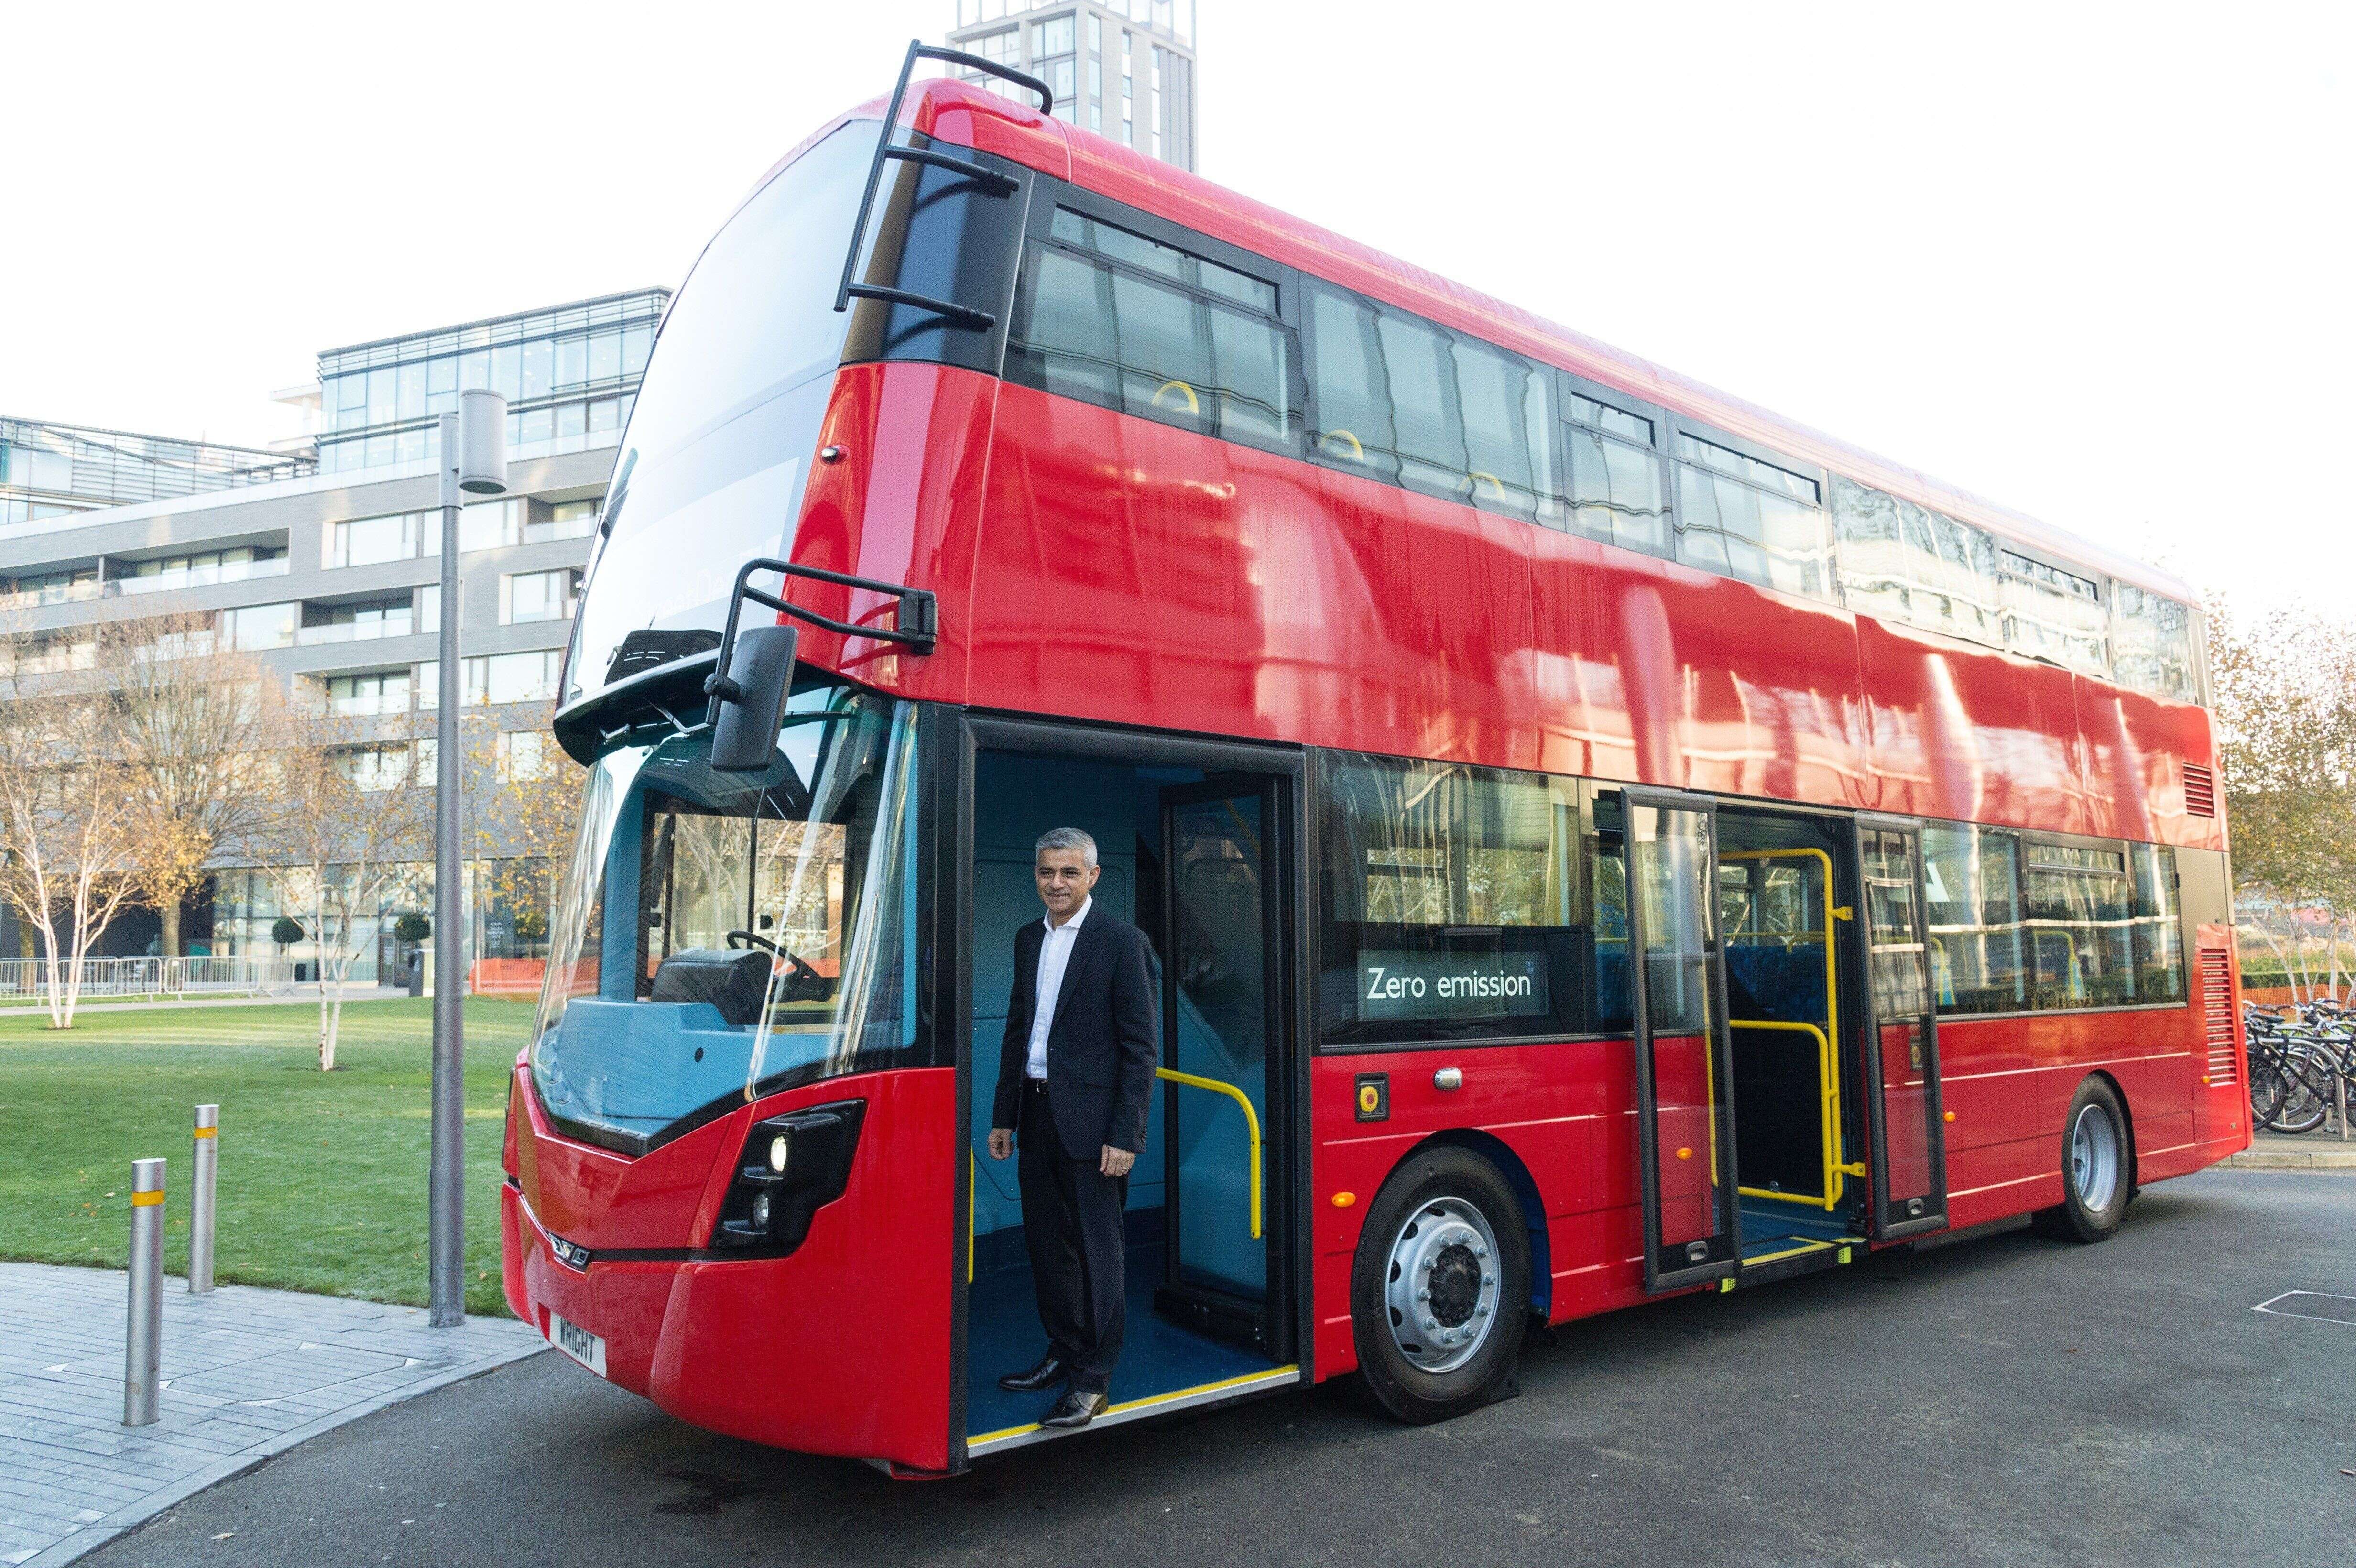 LONDON, ENGLAND - NOVEMBER 30: London mayor Sadiq Khan makes a keynote speech at the International Zero Emission Bus Conference and Summit in November 30, 2016 in London, United Kingdom. He also unveiled the worlds first hydrogen powered double decker bus made by leading UK bus manufacturer Wrightbus (Photo by Ray Tang/Anadolu Agency/Getty Images)